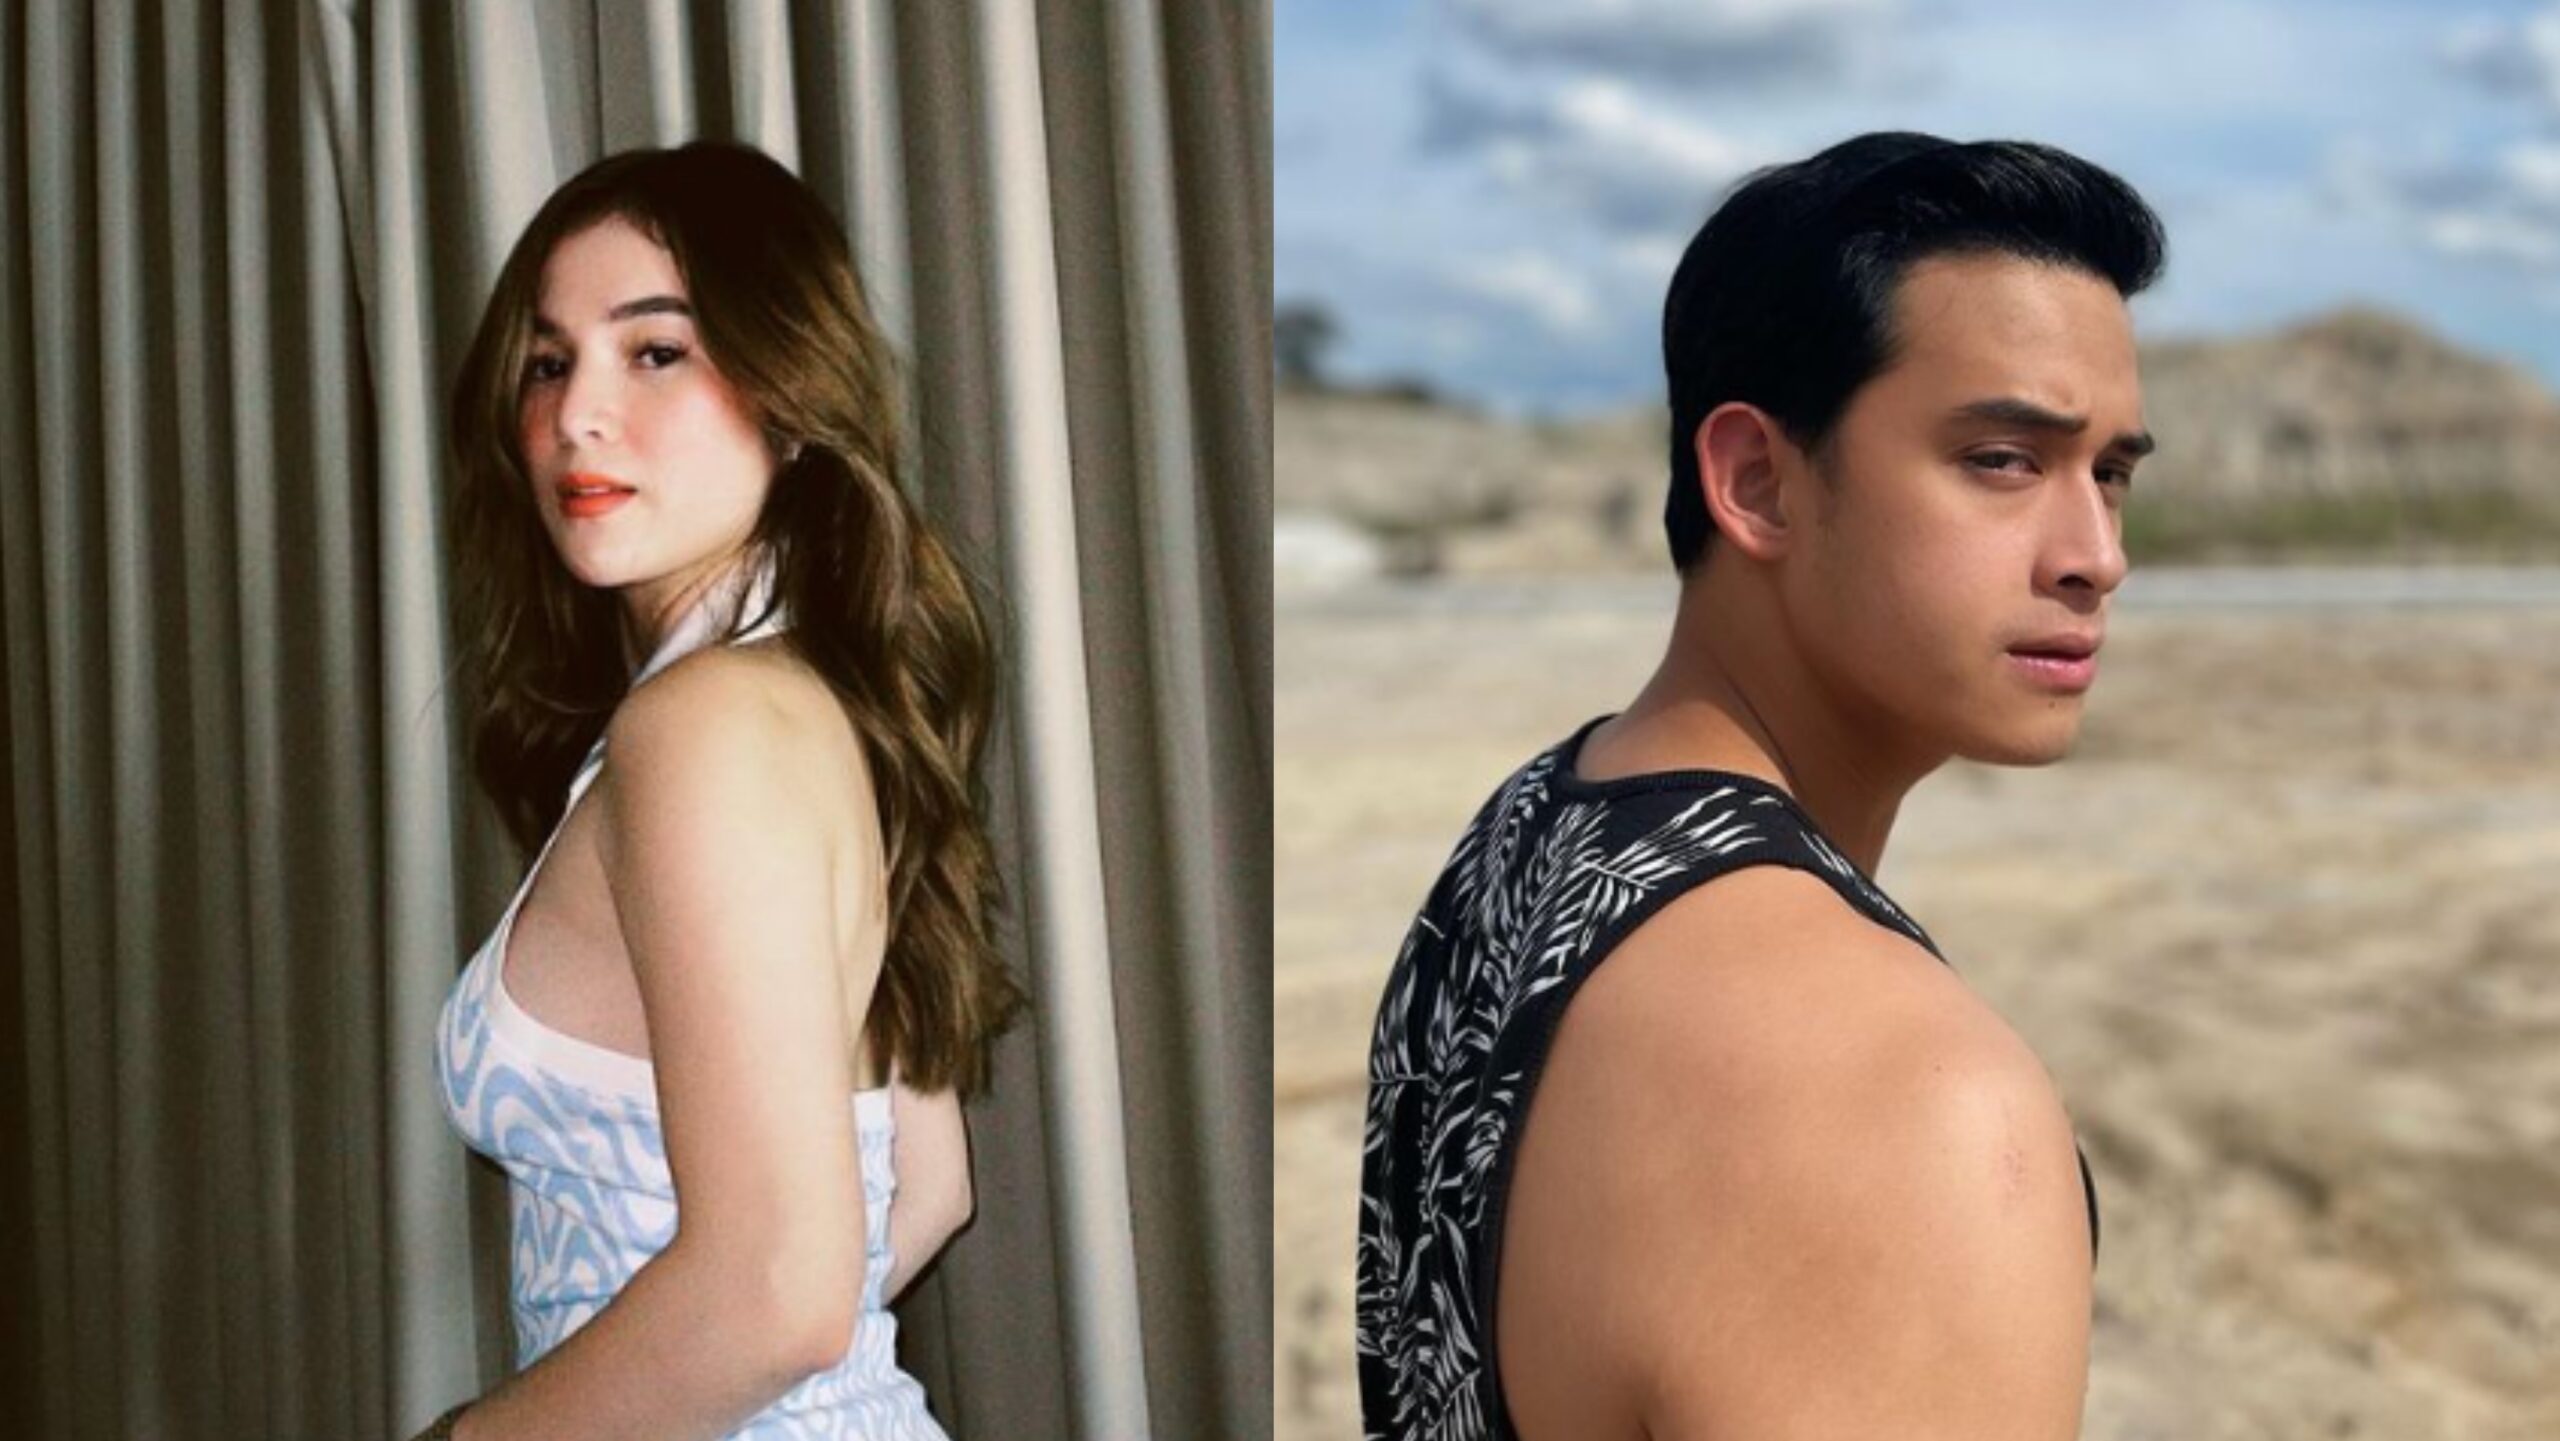 ‘Foul’: Barbie Imperial reacts to Diego Loyzaga’s statement on cheating